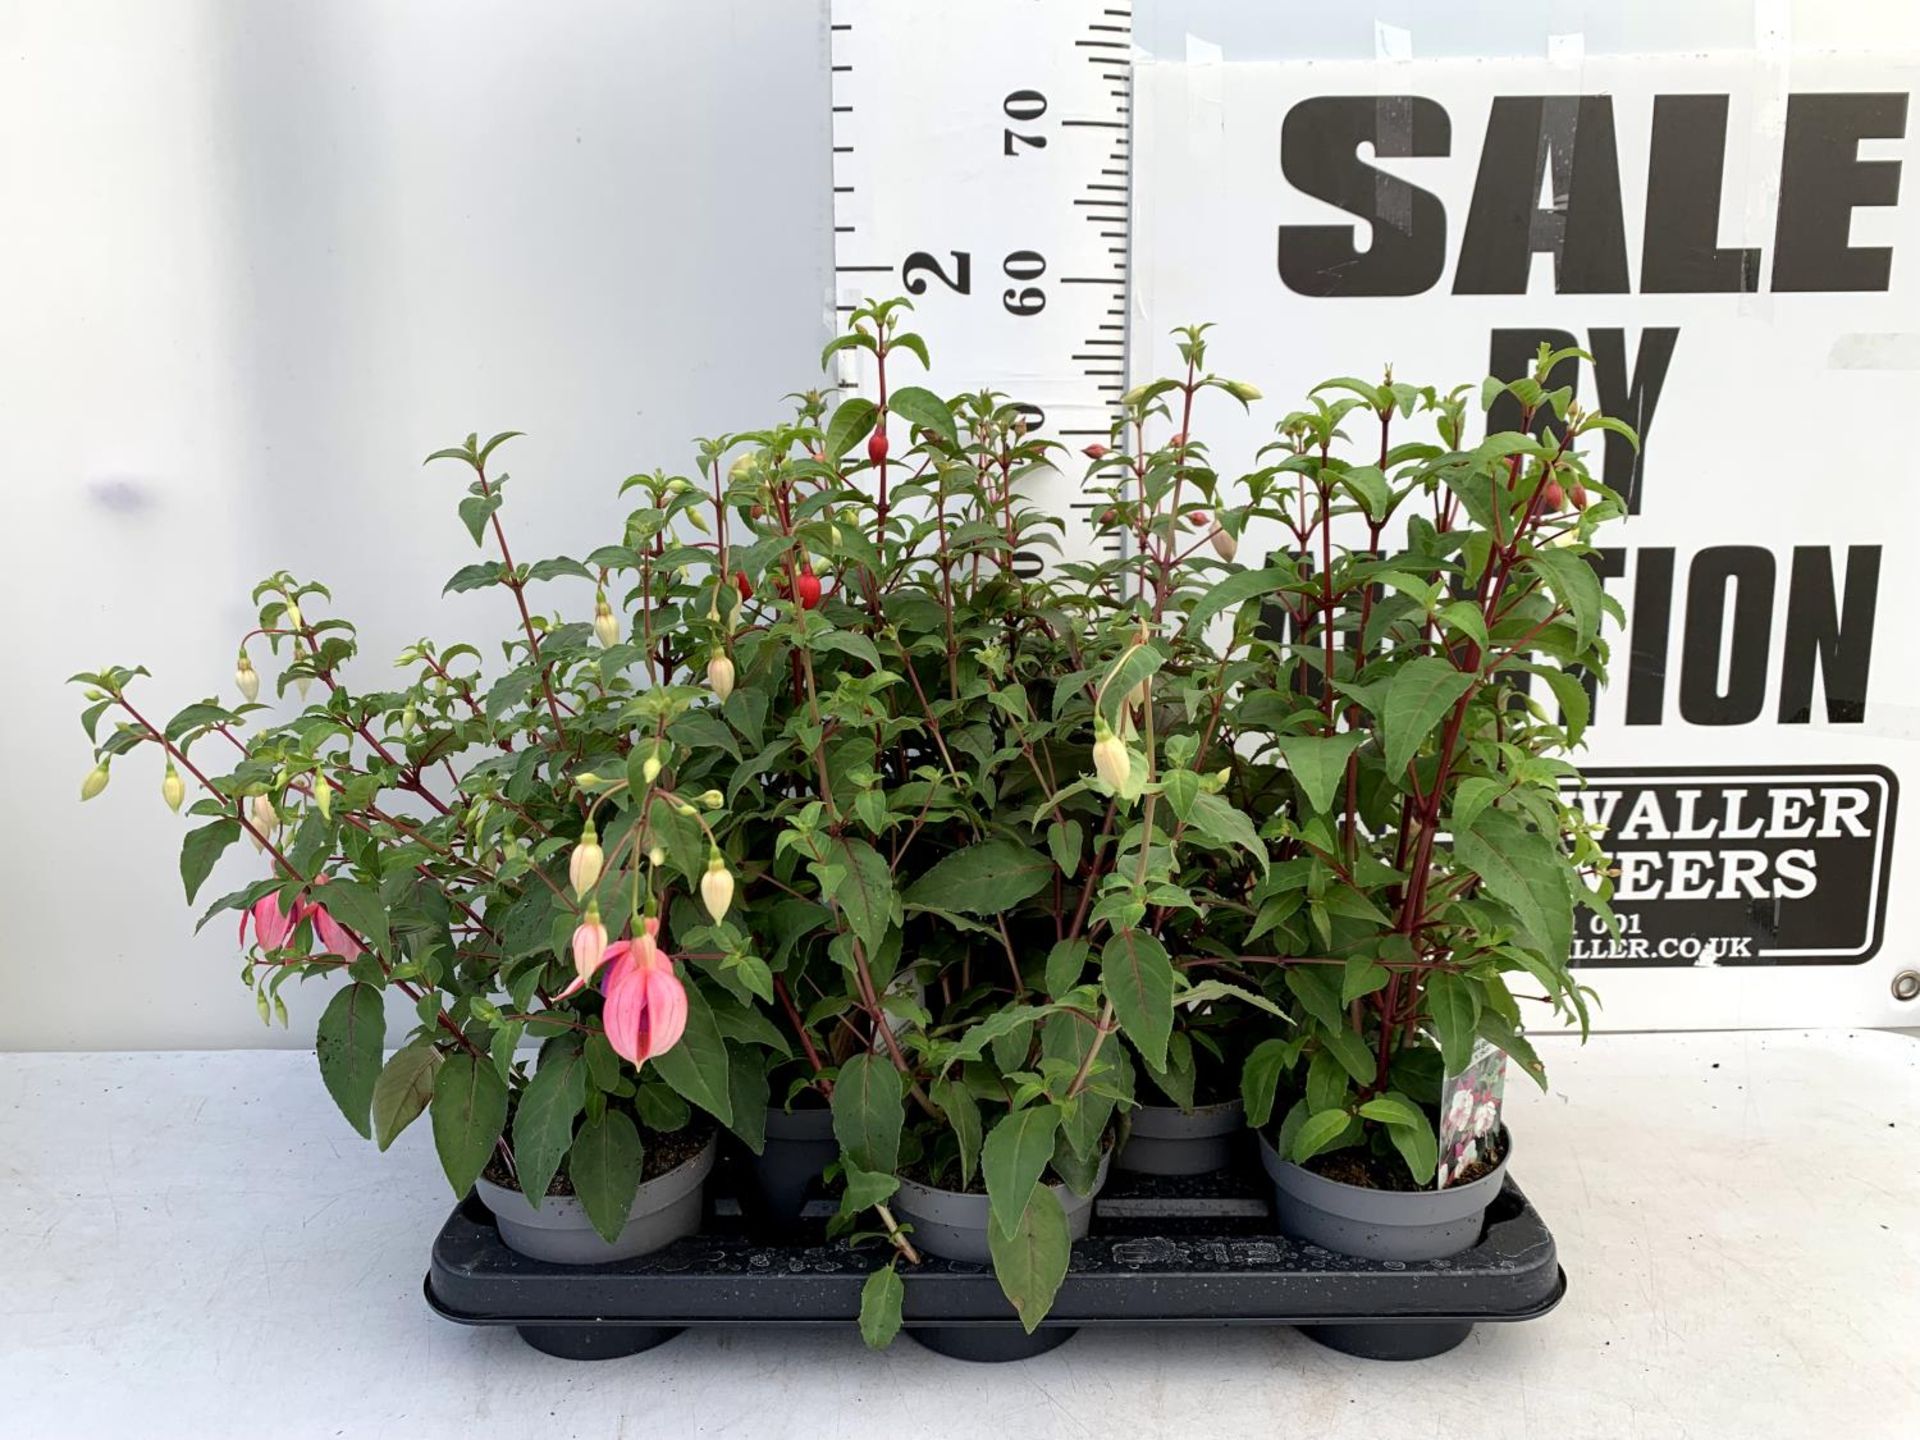 EIGHT FUCHSIA BUSH 'NICE AND EASY' IN 1 LTR POTS ON A TRAY PLUS VAT TO BE SOLD FOR THE EIGHT